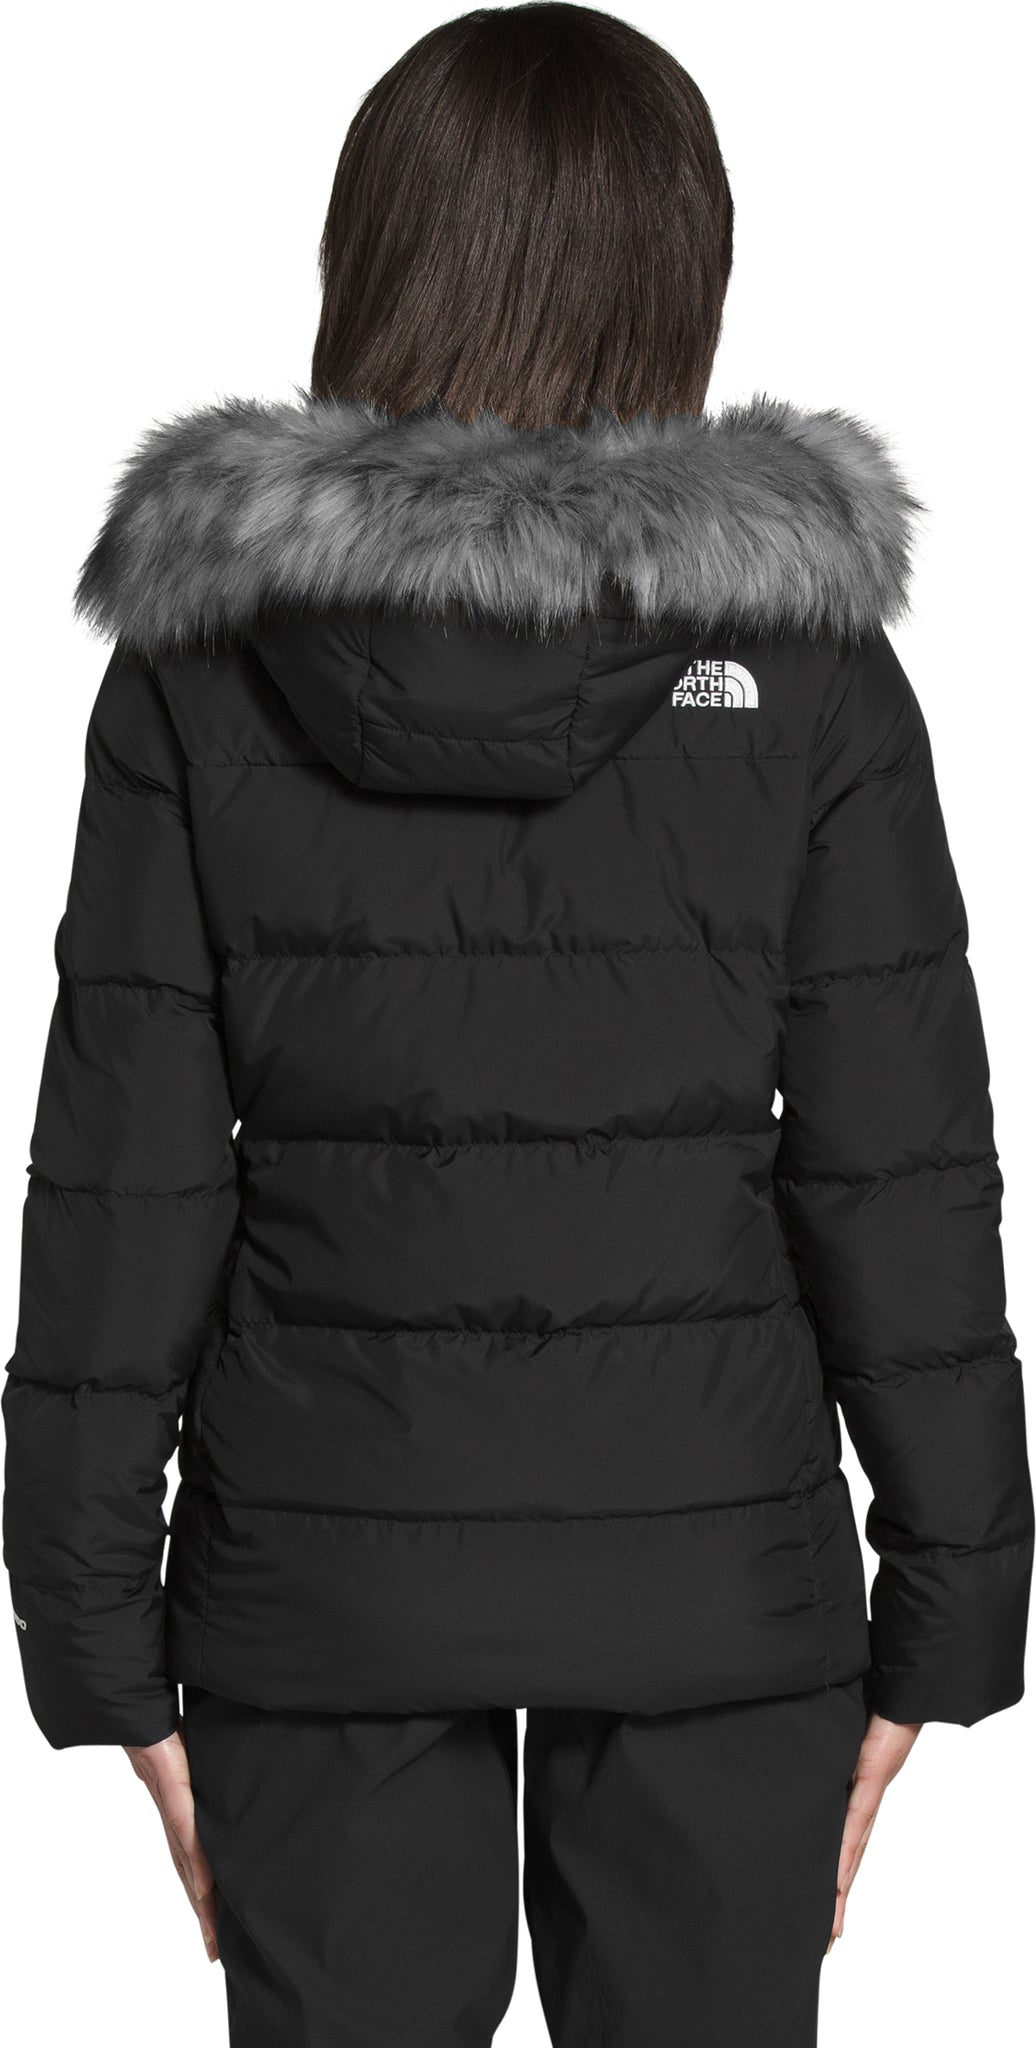 The North Face Gotham Jacket - Women's | Altitude Sports